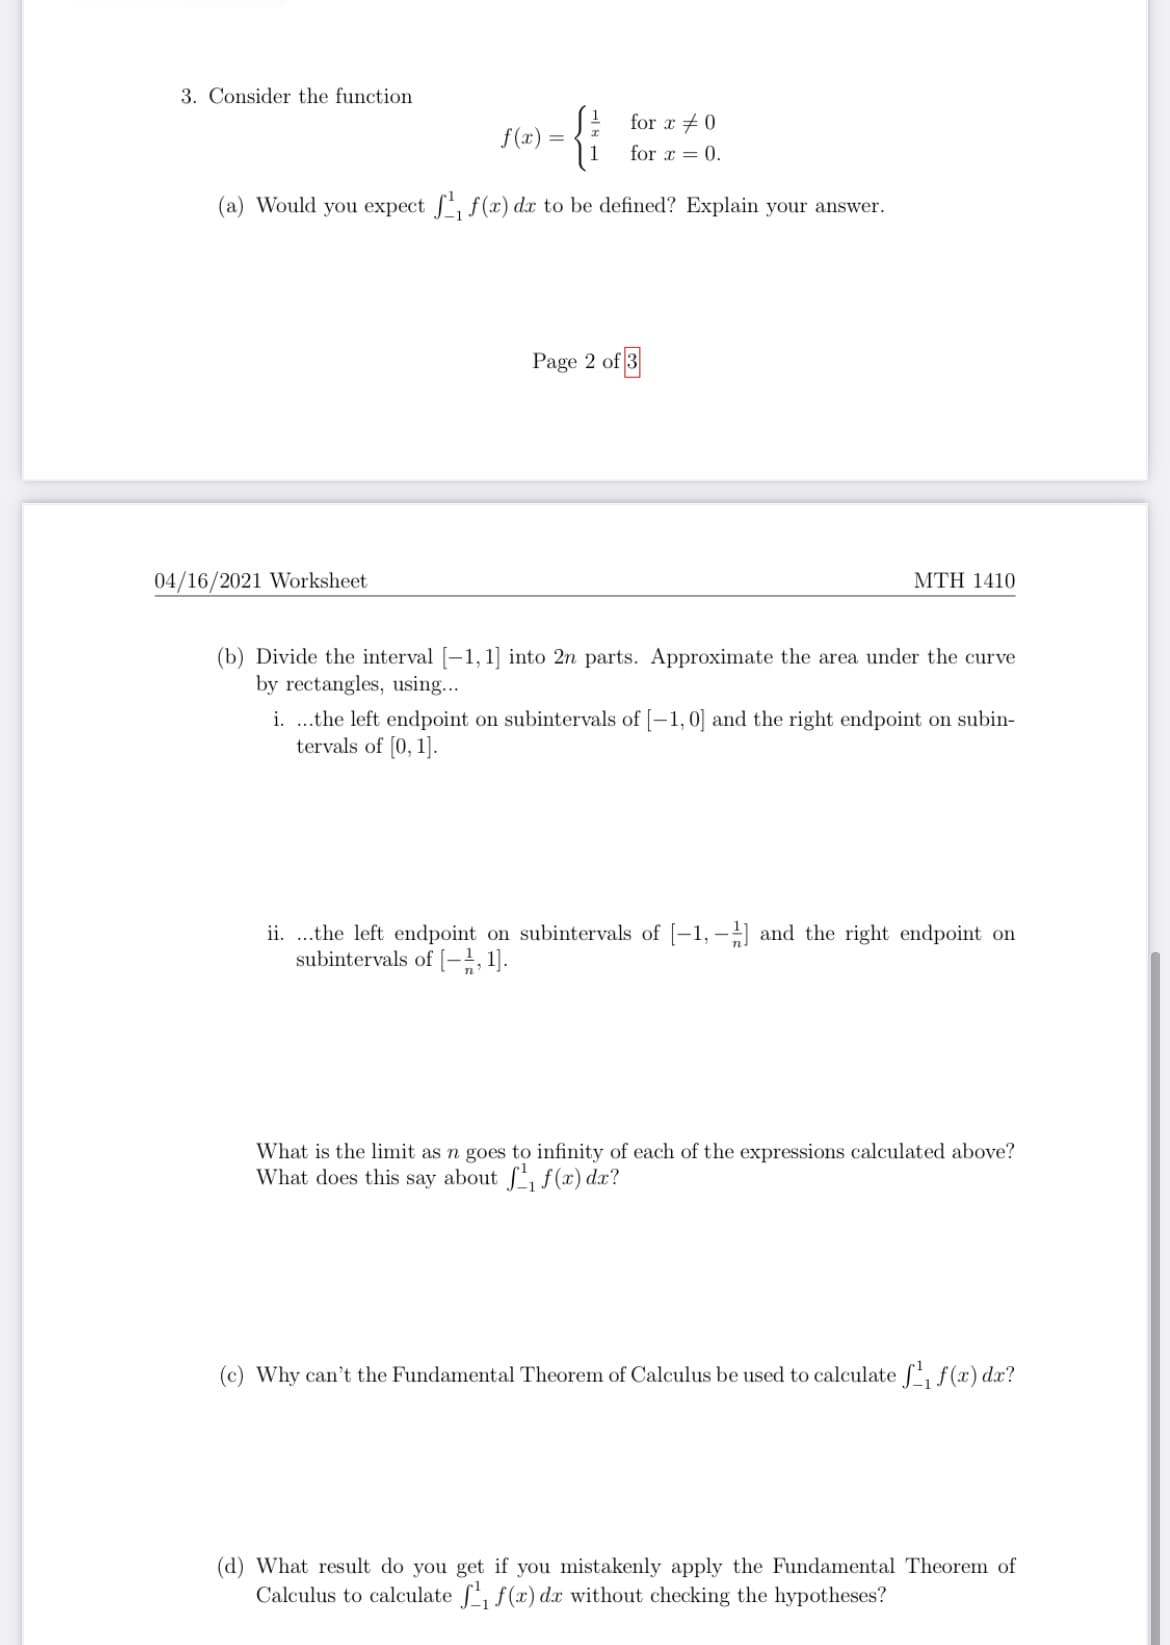 3. Consider the function
for x +0
f(x) =
for x = 0.
(a) Would you expect , f(x) dx to be defined? Explain your answer.
Page 2 of 3
04/16/2021 Worksheet
MTH 1410
(b) Divide the interval [-1, 1] into 2n parts. Approximate the area under the curve
by rectangles, using...
i. .the left endpoint on subintervals of [-1,0] and the right endpoint on subin-
tervals of [0, 1].
ii. .the left endpoint on subintervals of [-1, -] and the right endpoint on
subintervals of [-;, 1].
What is the limit as n goes to infinity of each of the expressions calculated above?
What does this say about f f(x) dx?
(c) Why can't the Fundamental Theorem of Calculus be used to calculate f, f (x) dx?
(d) What result do you get if you mistakenly apply the Fundamental Theorem of
Calculus to calculate f, f(x) dx without checking the hypotheses?
